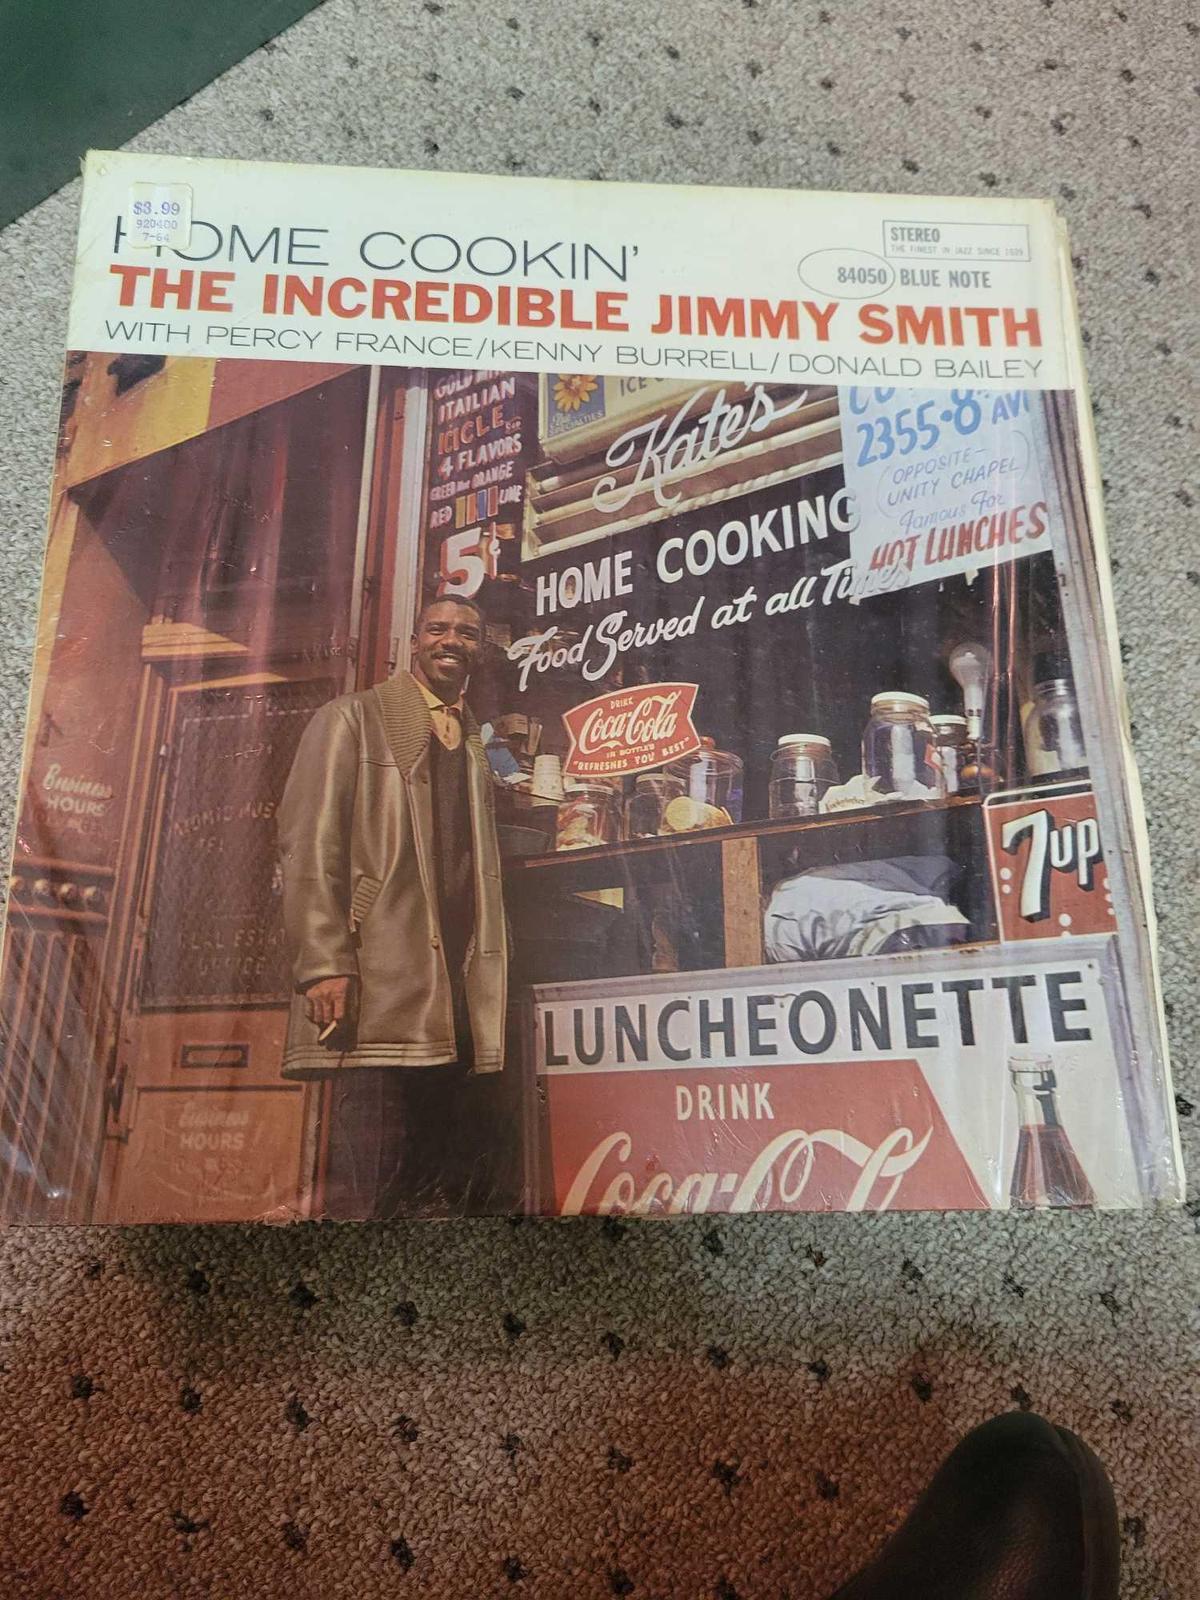 Home Cookin' Record $1 STS